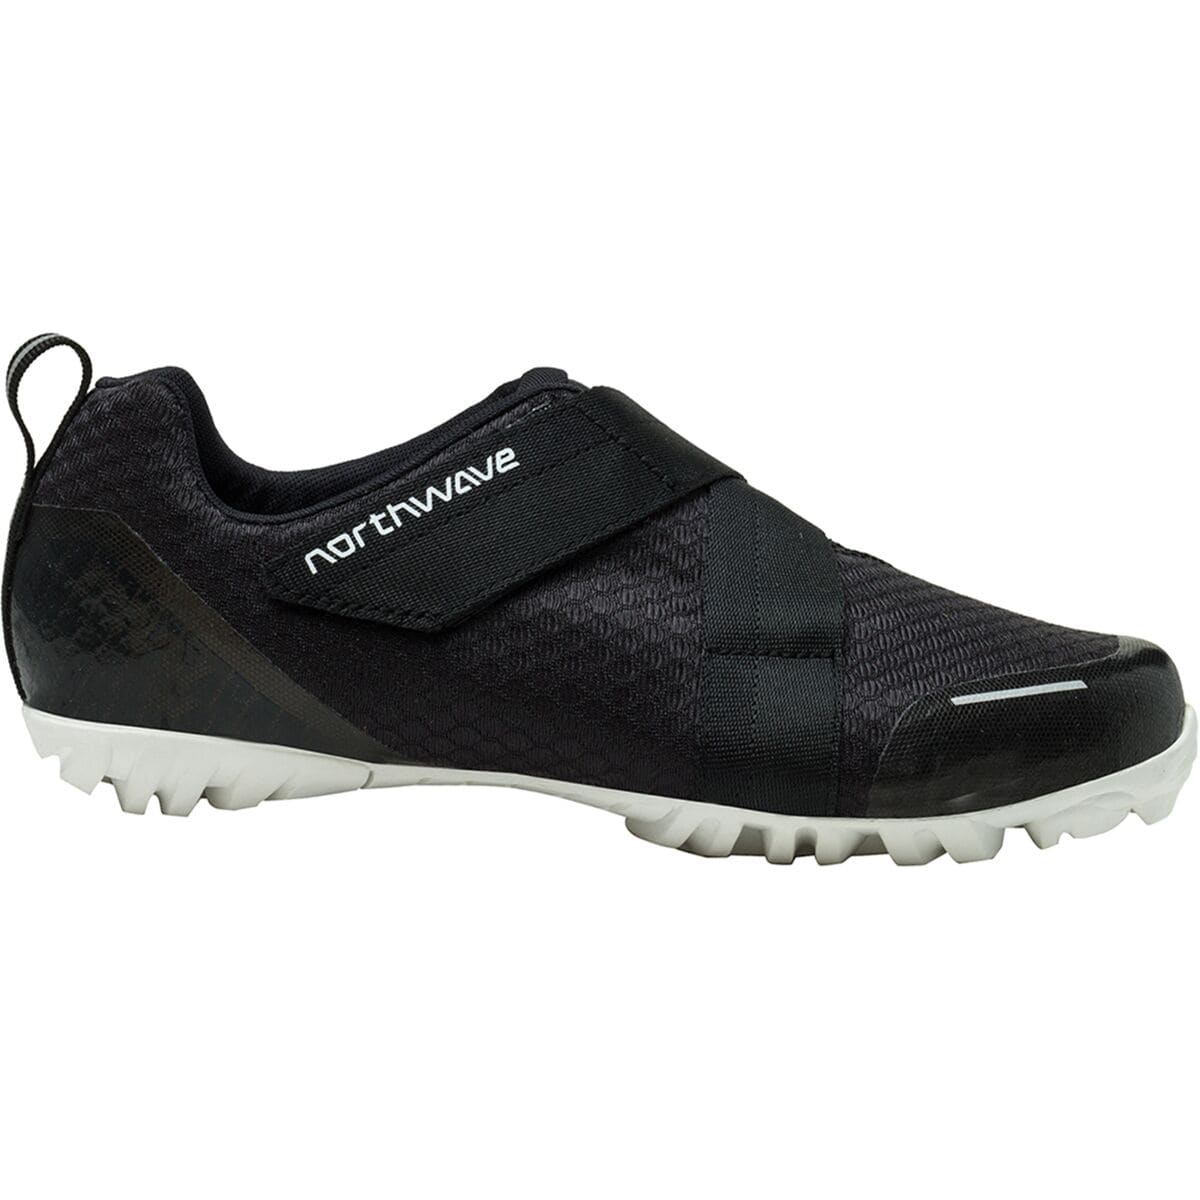 Northwave Active Cycling Shoe - Women's Black, 45.0